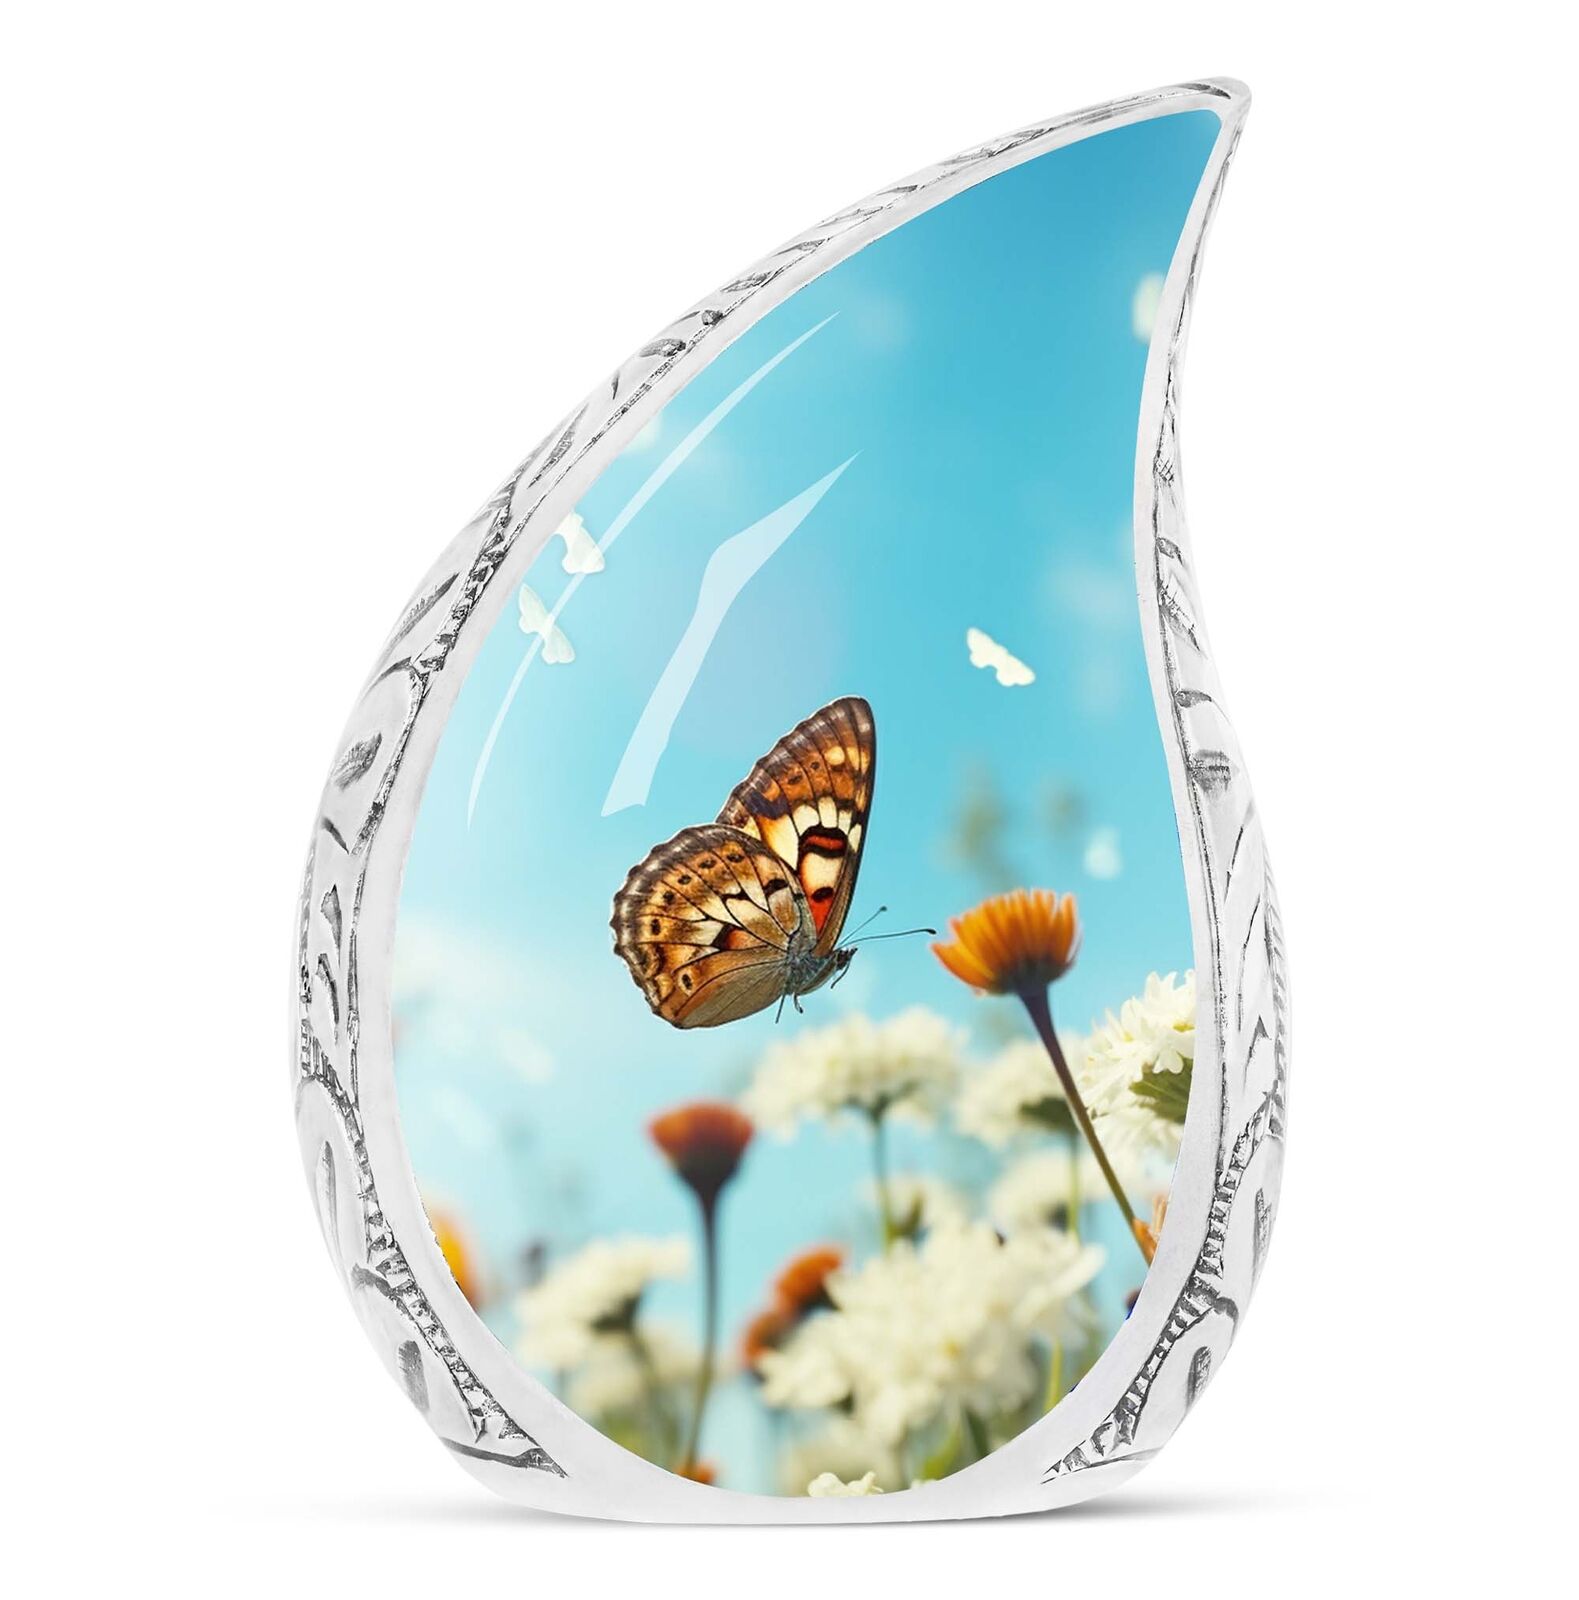 Teardrop UrnButterflies Fly In A Morning Meadow Burial Urns For Cremated Remains